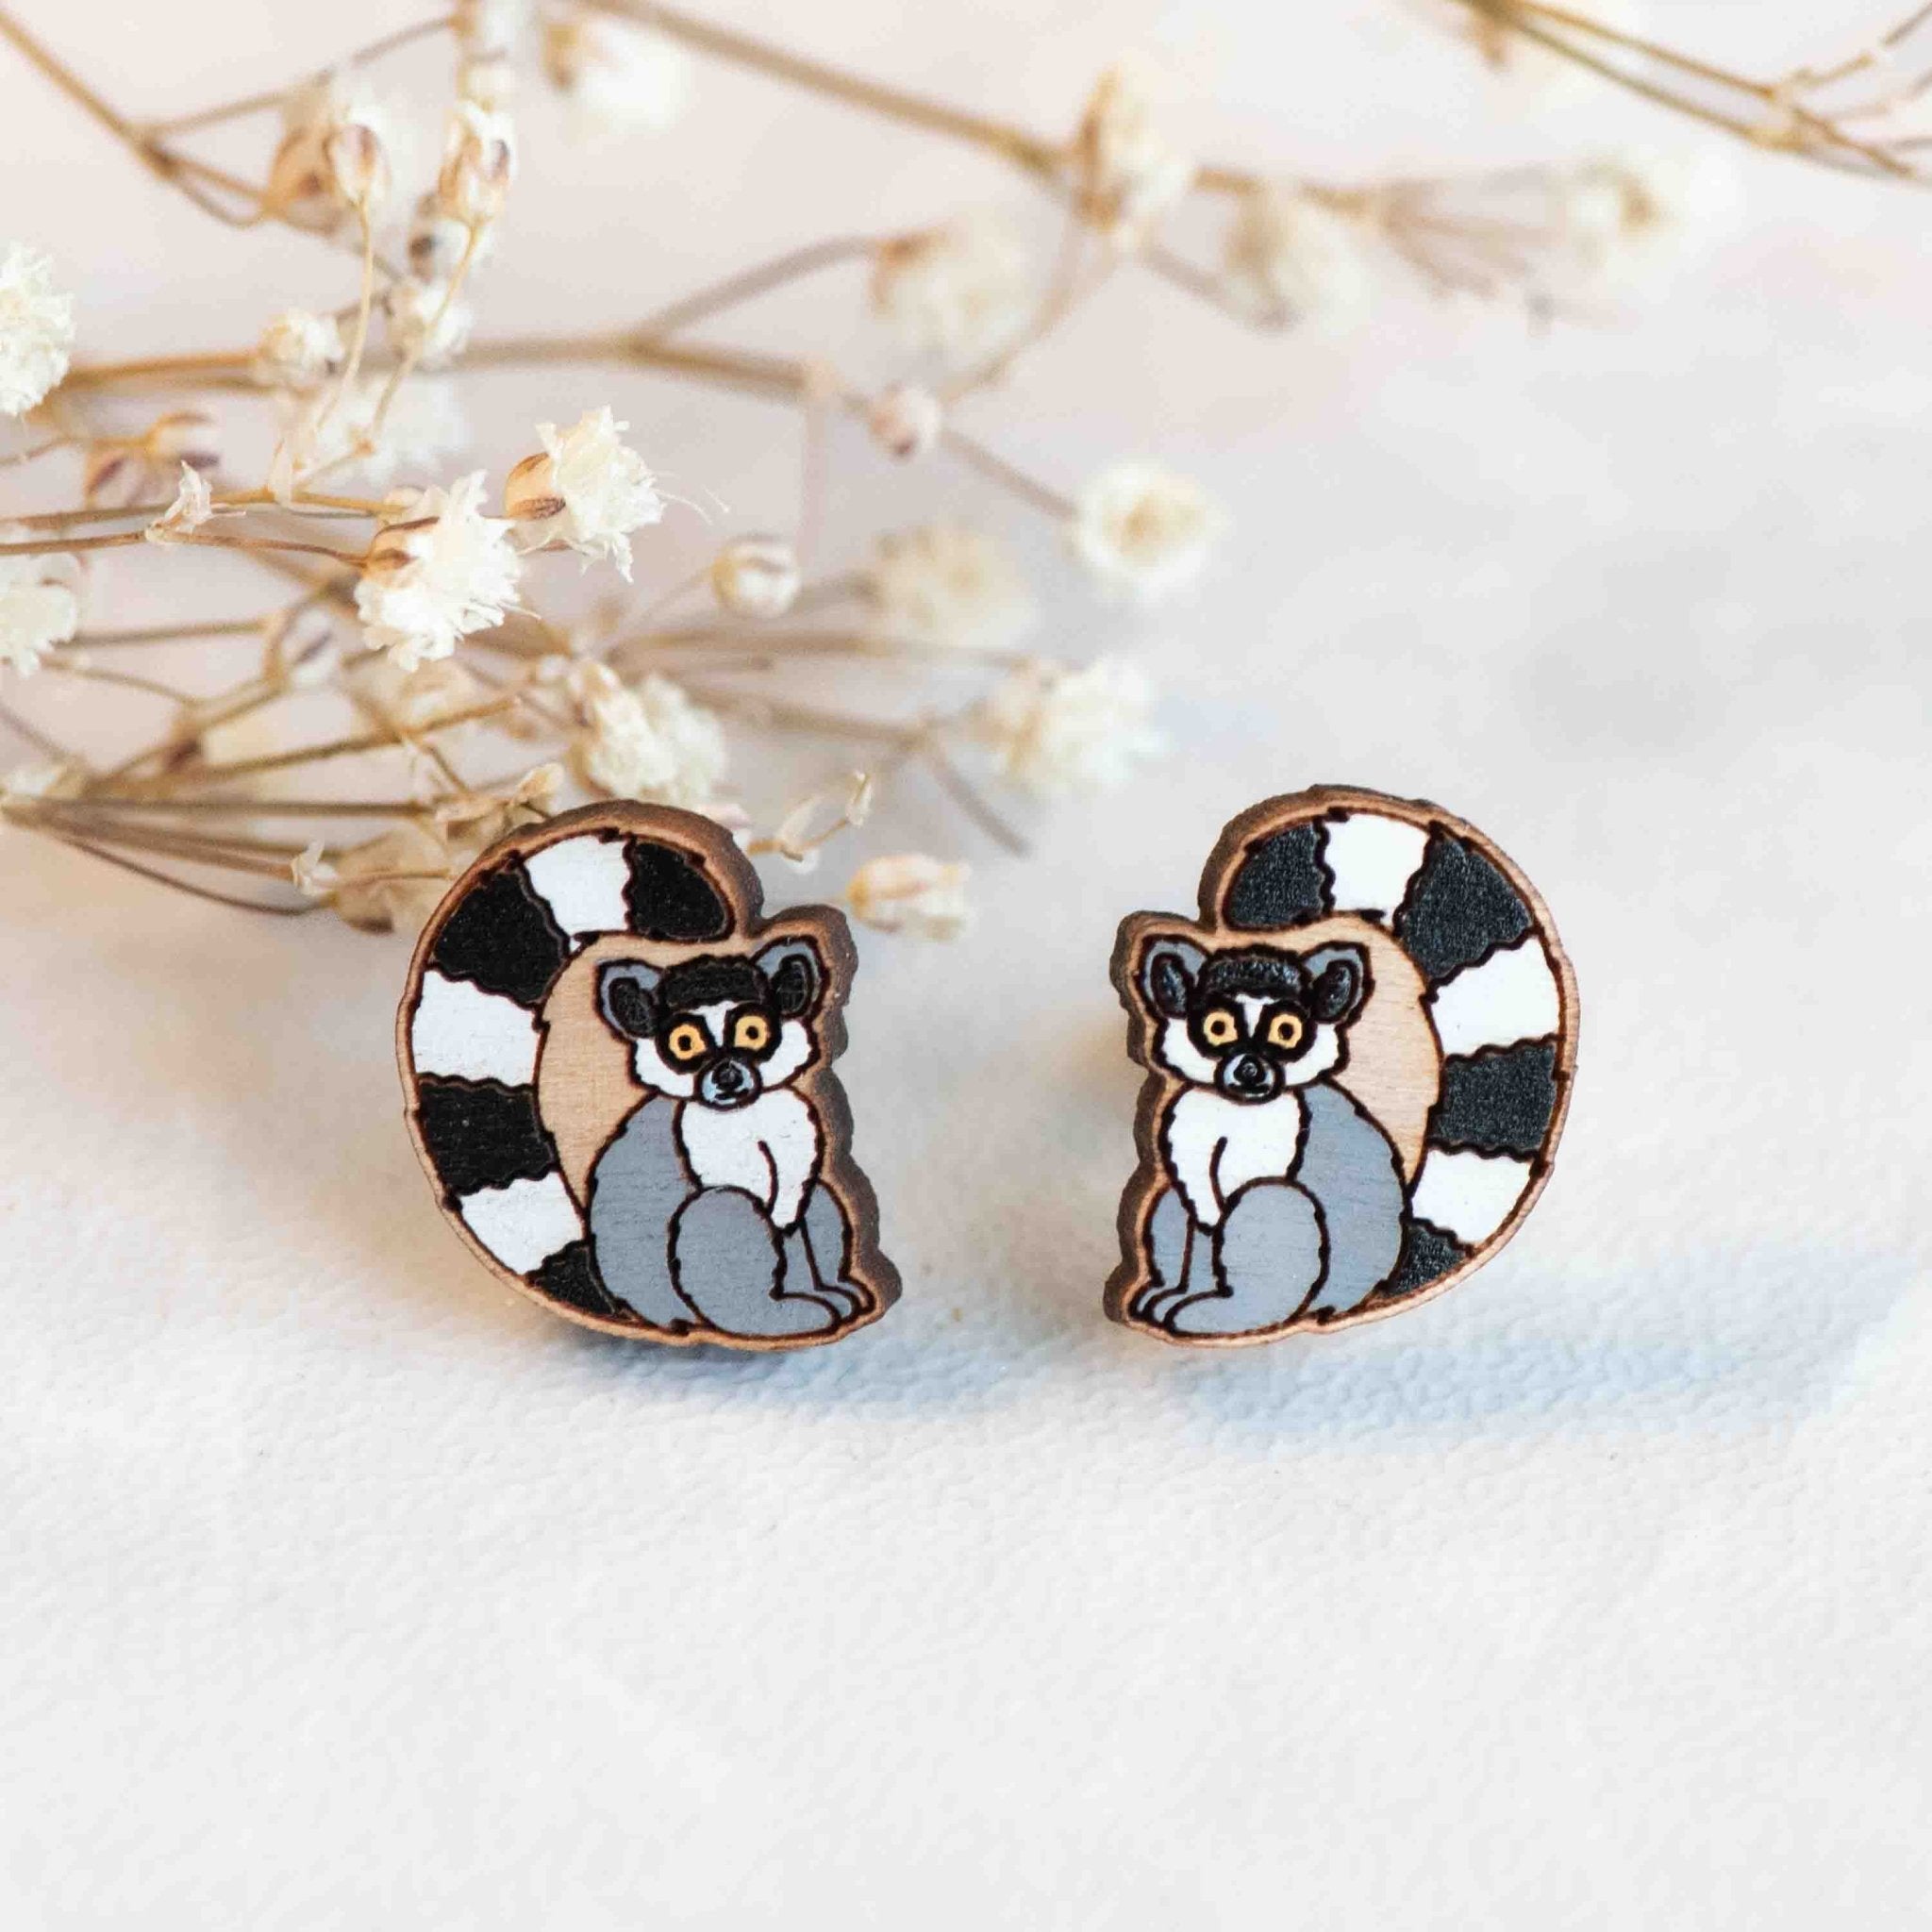 Hand-painted Lemur Earrings Wooden Studs Eco-jewellery - PEL10170 - Robin Valley Official Store